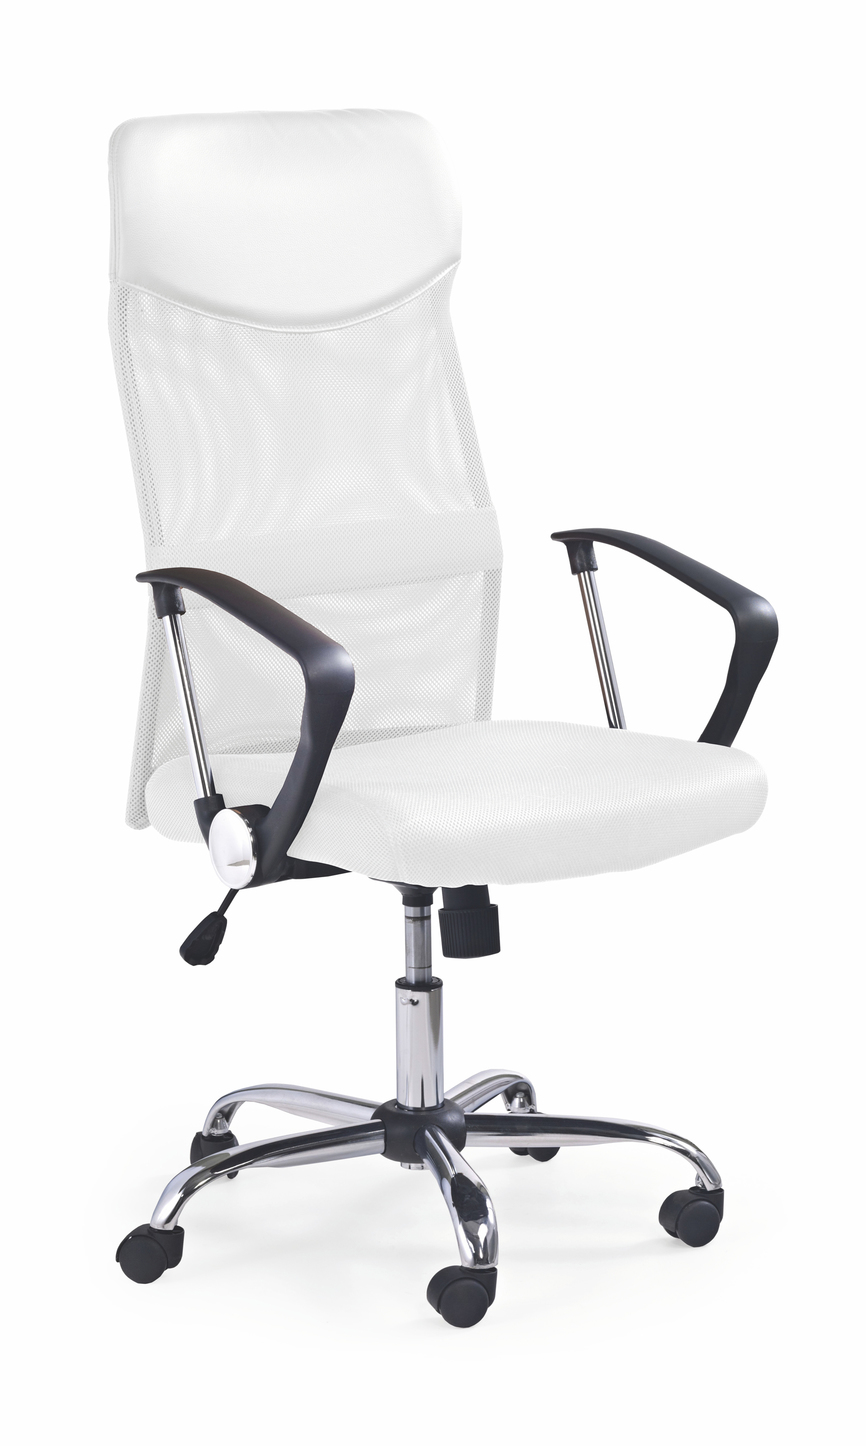 VIRE chair color: white